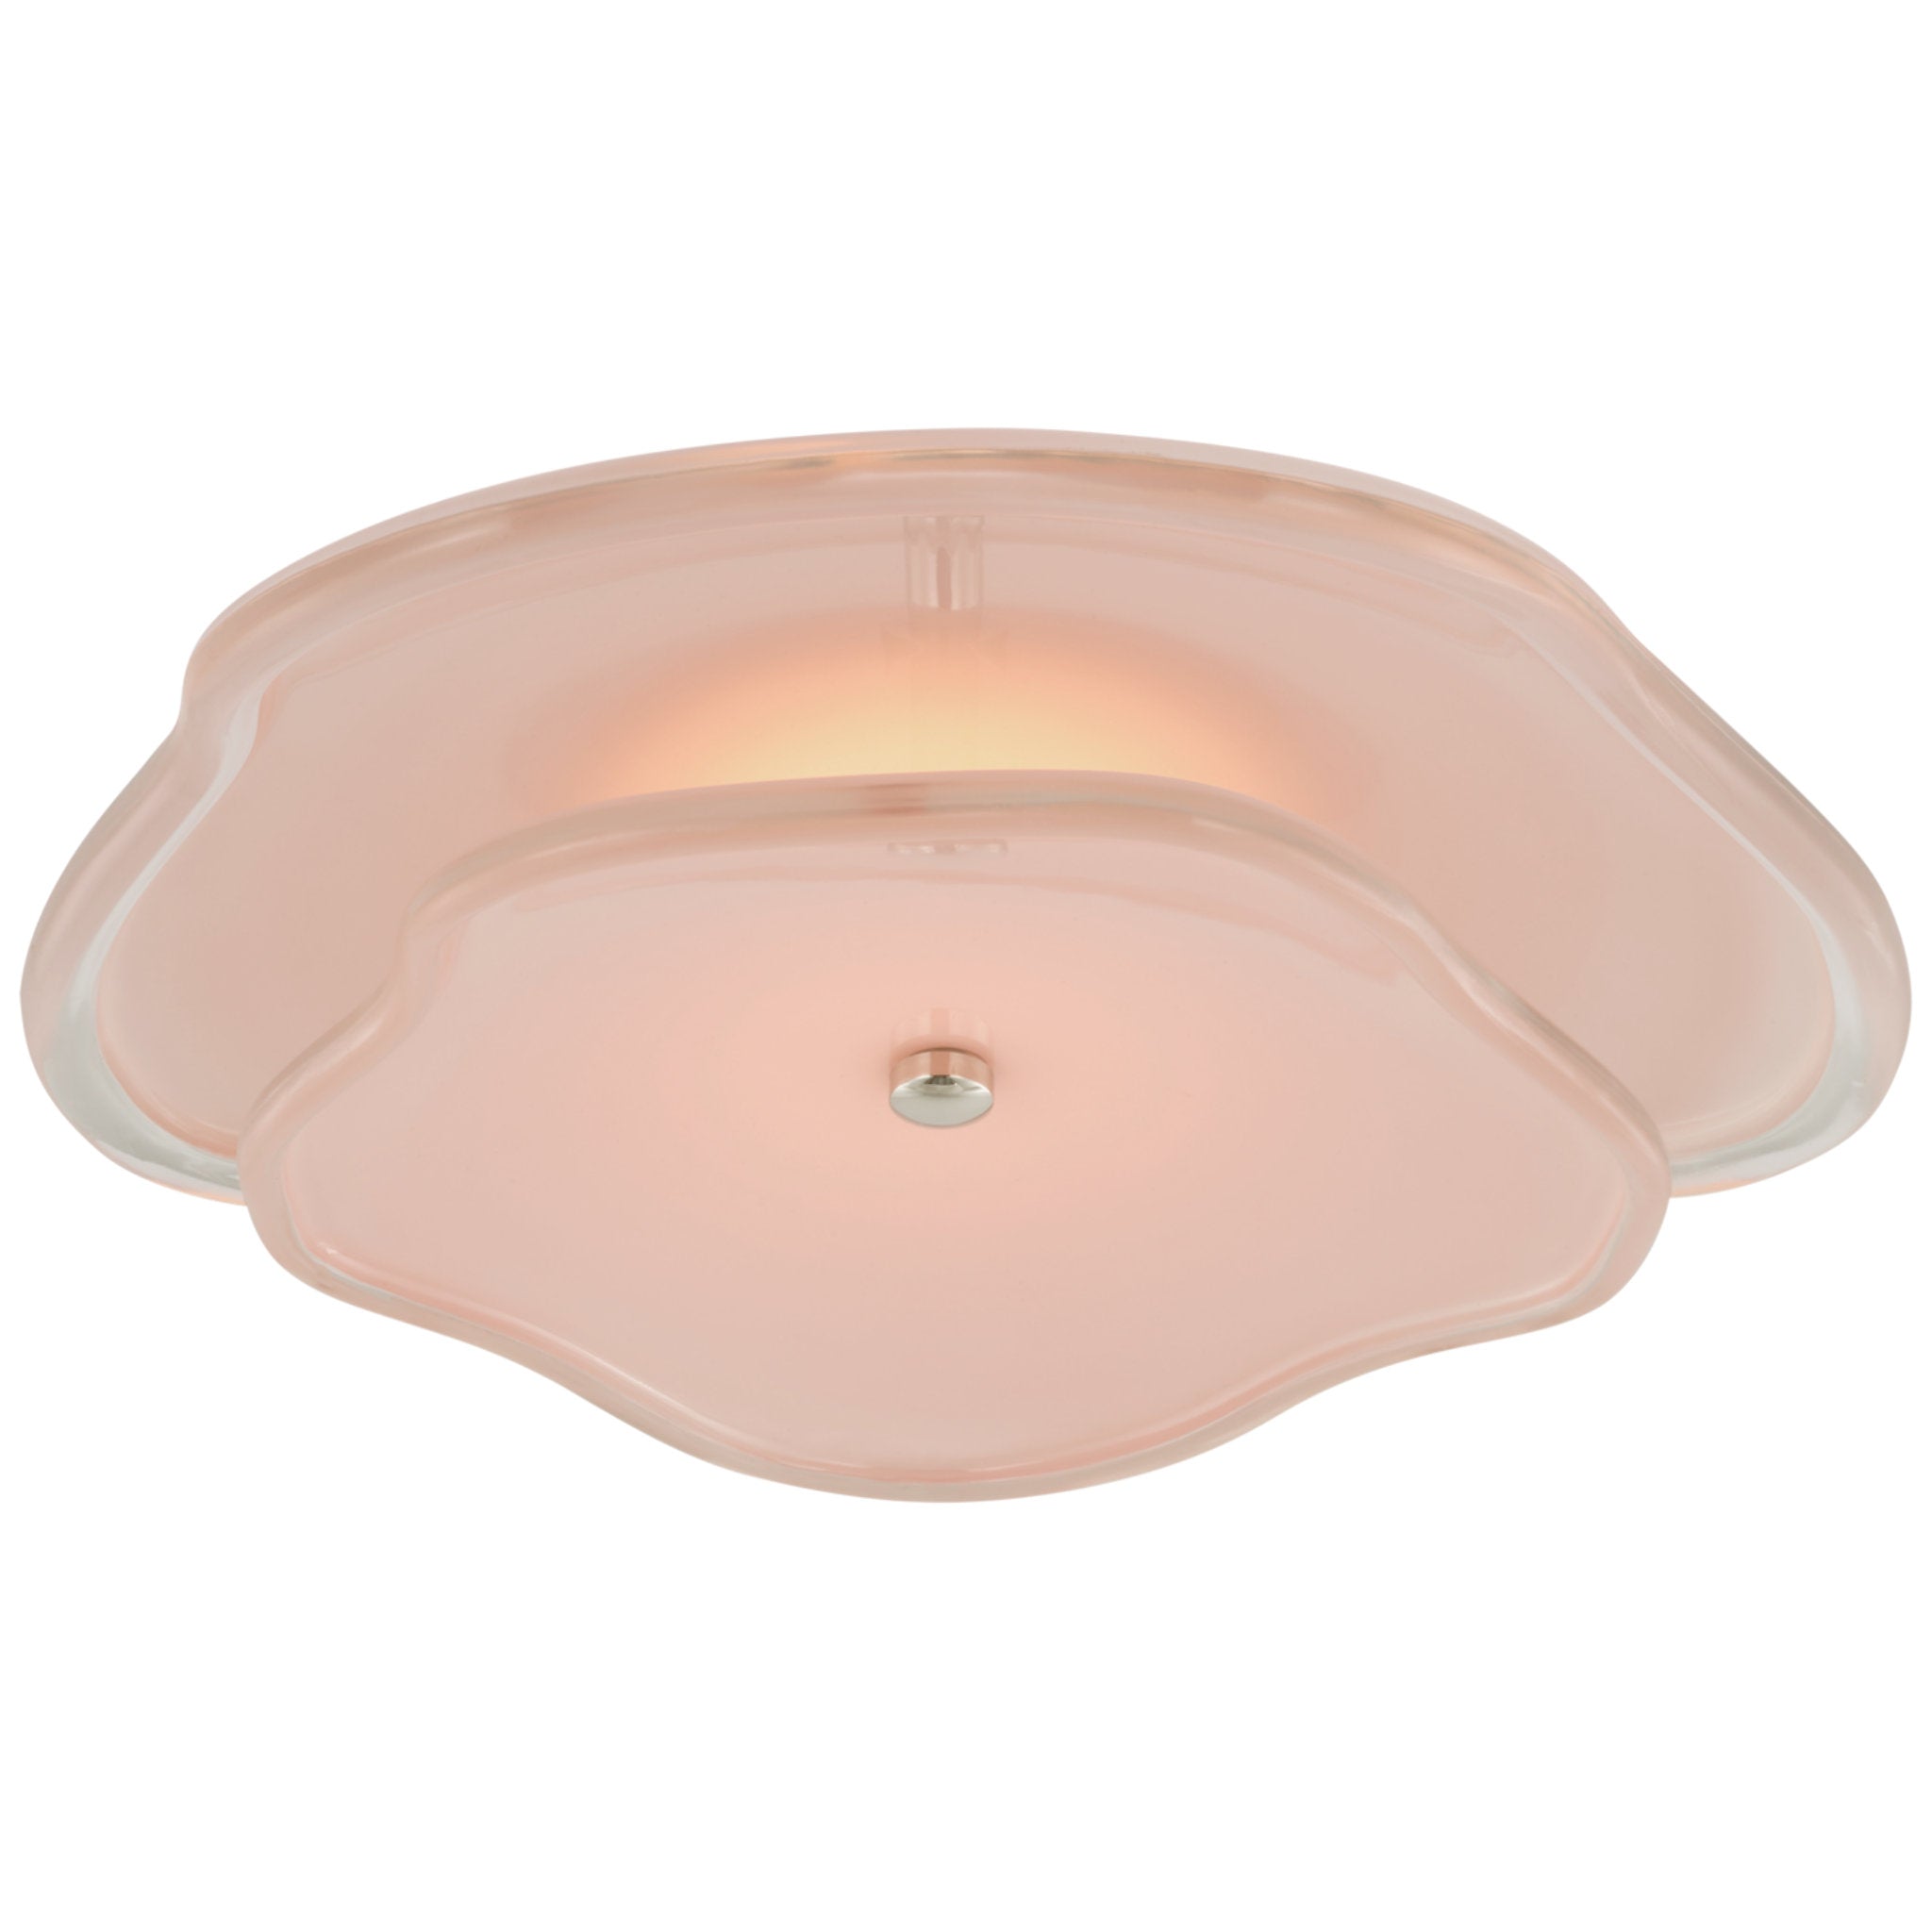 kate spade new york Leighton 14" Layered Flush Mount in Polished Nickel with Blush Tinted Glass